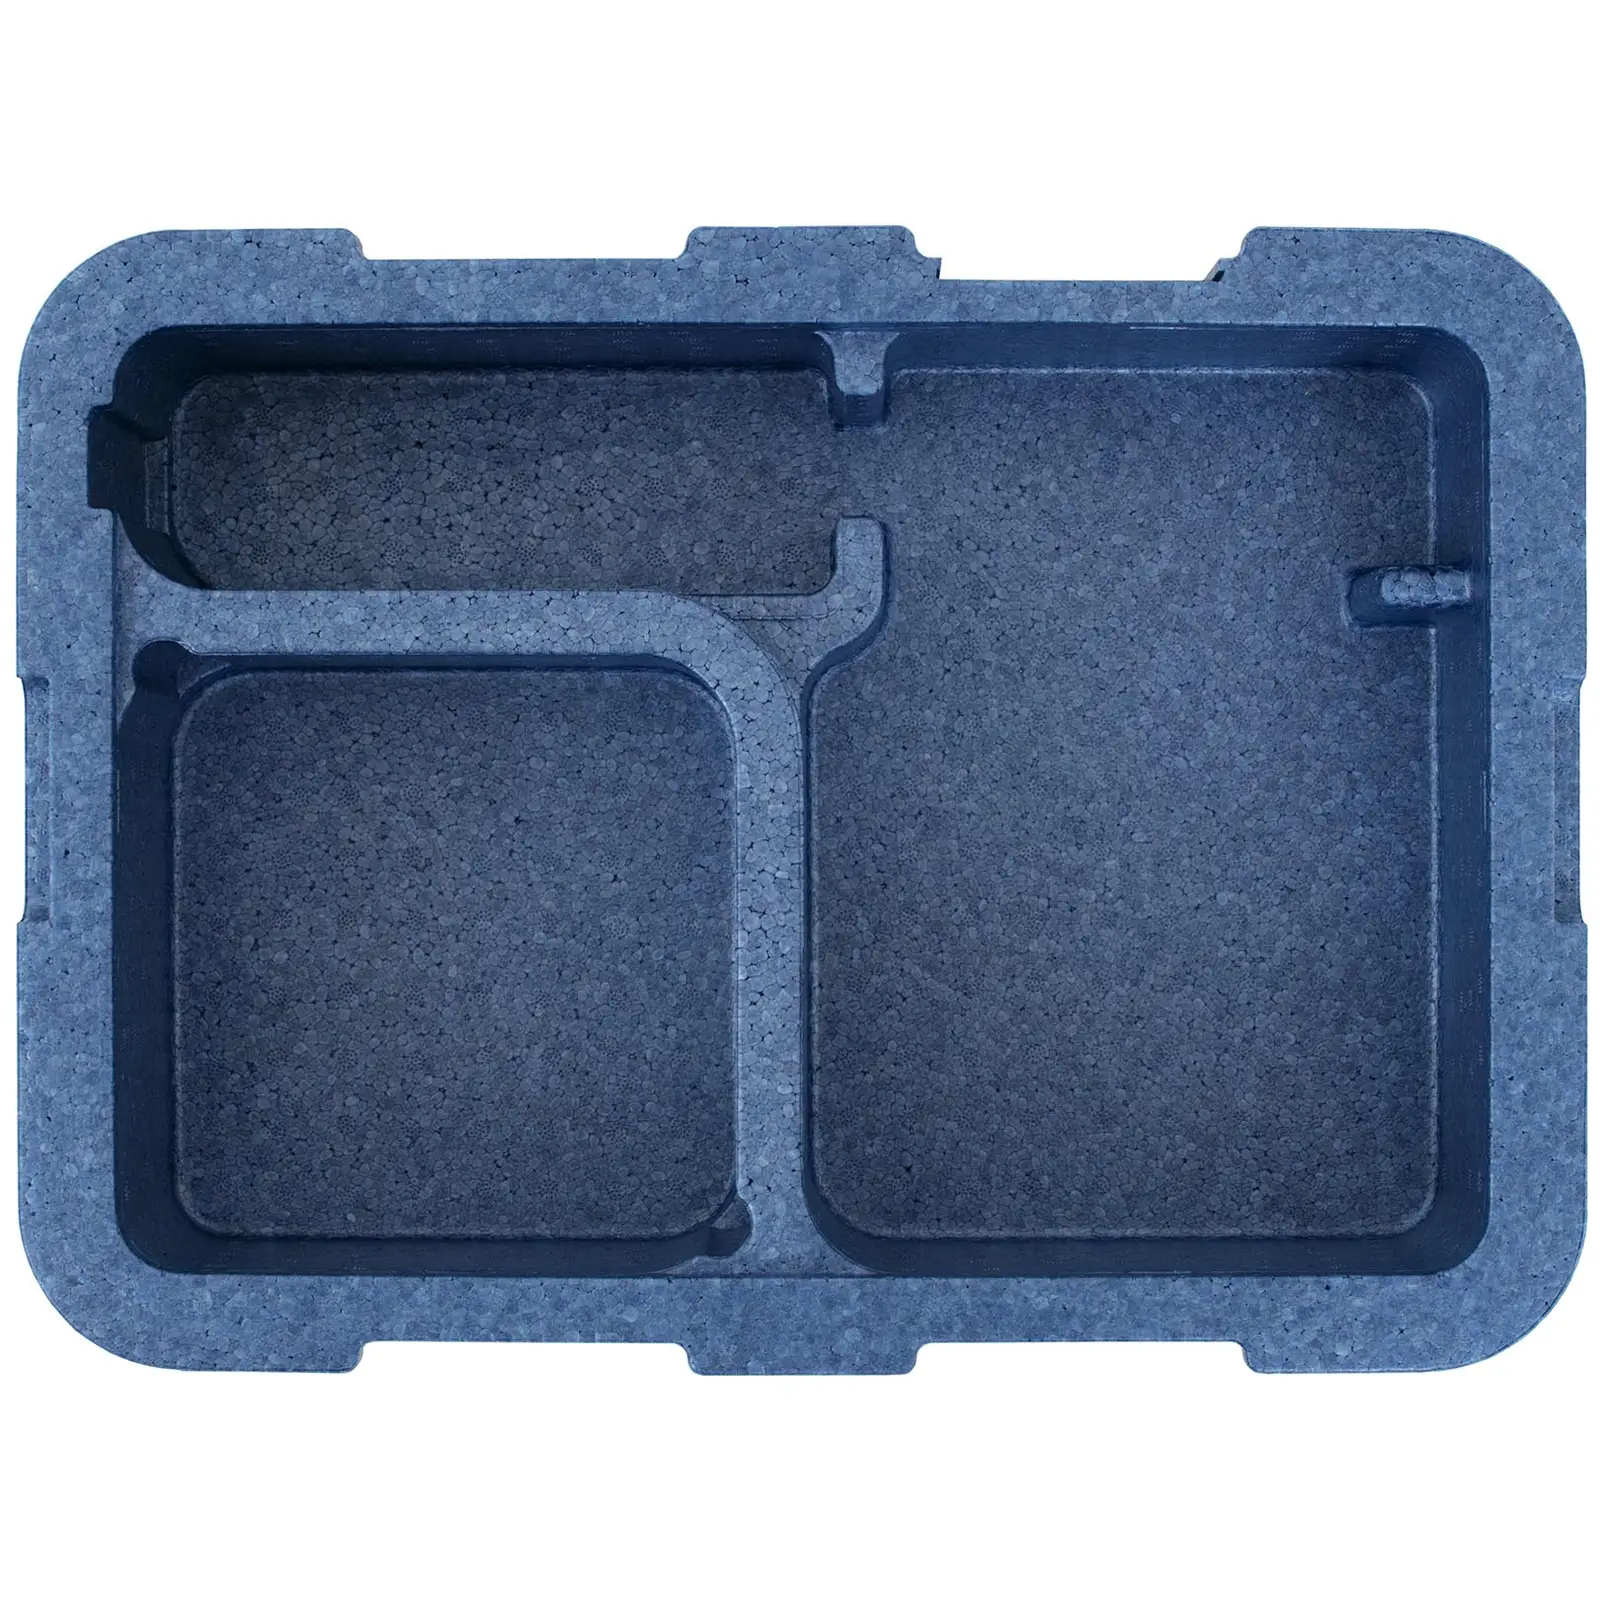 Thermal box - 4 compartments